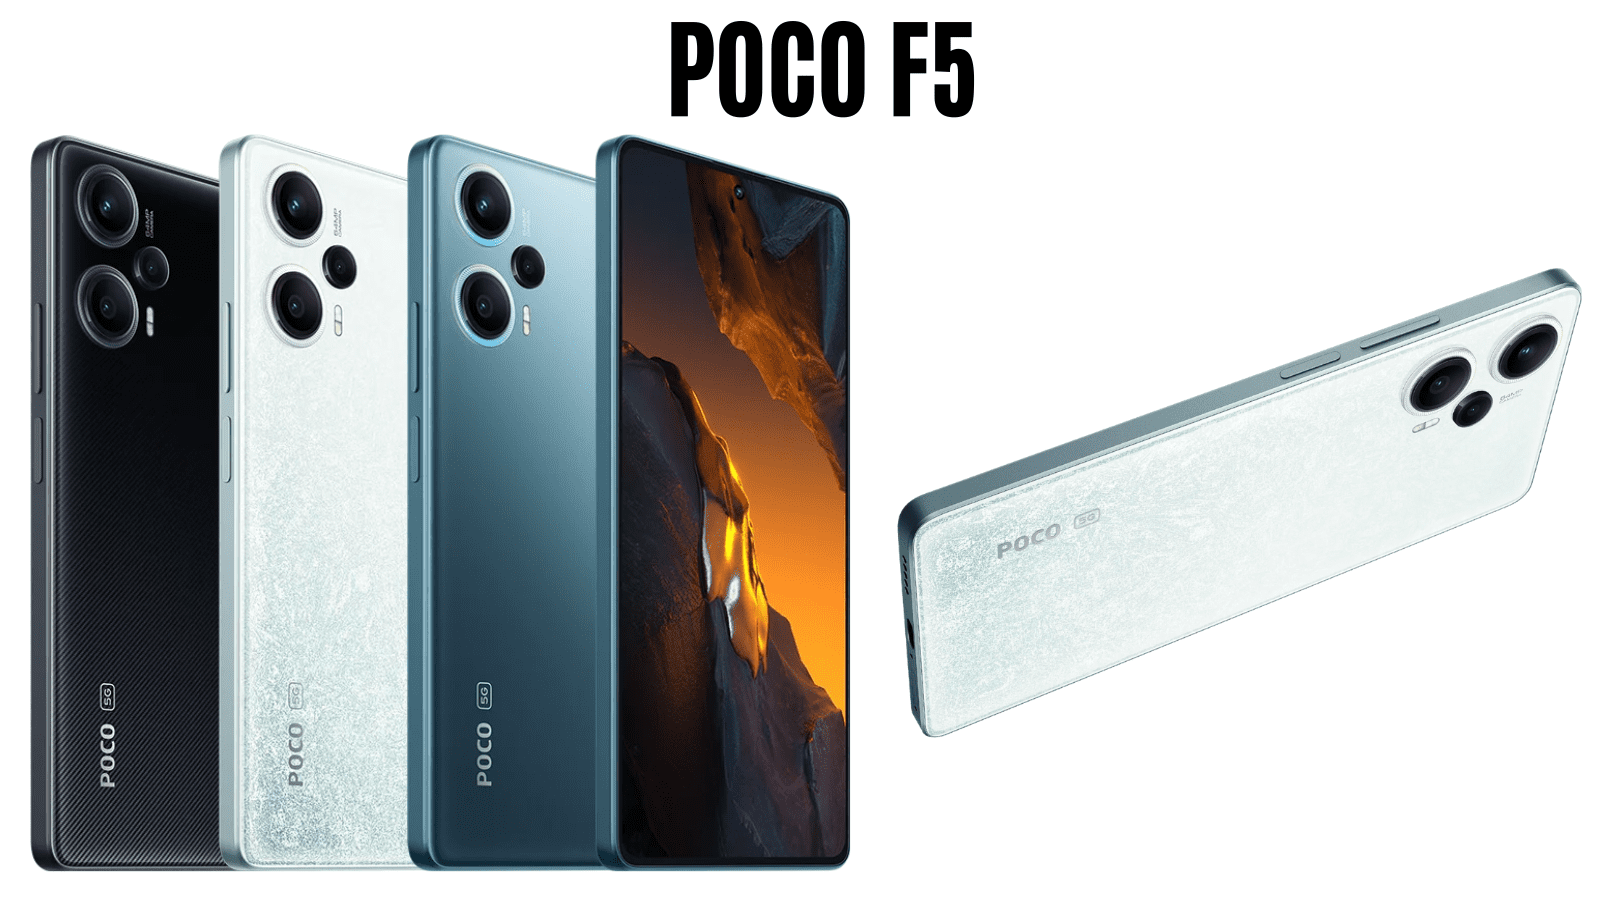 POCO F5 specifications